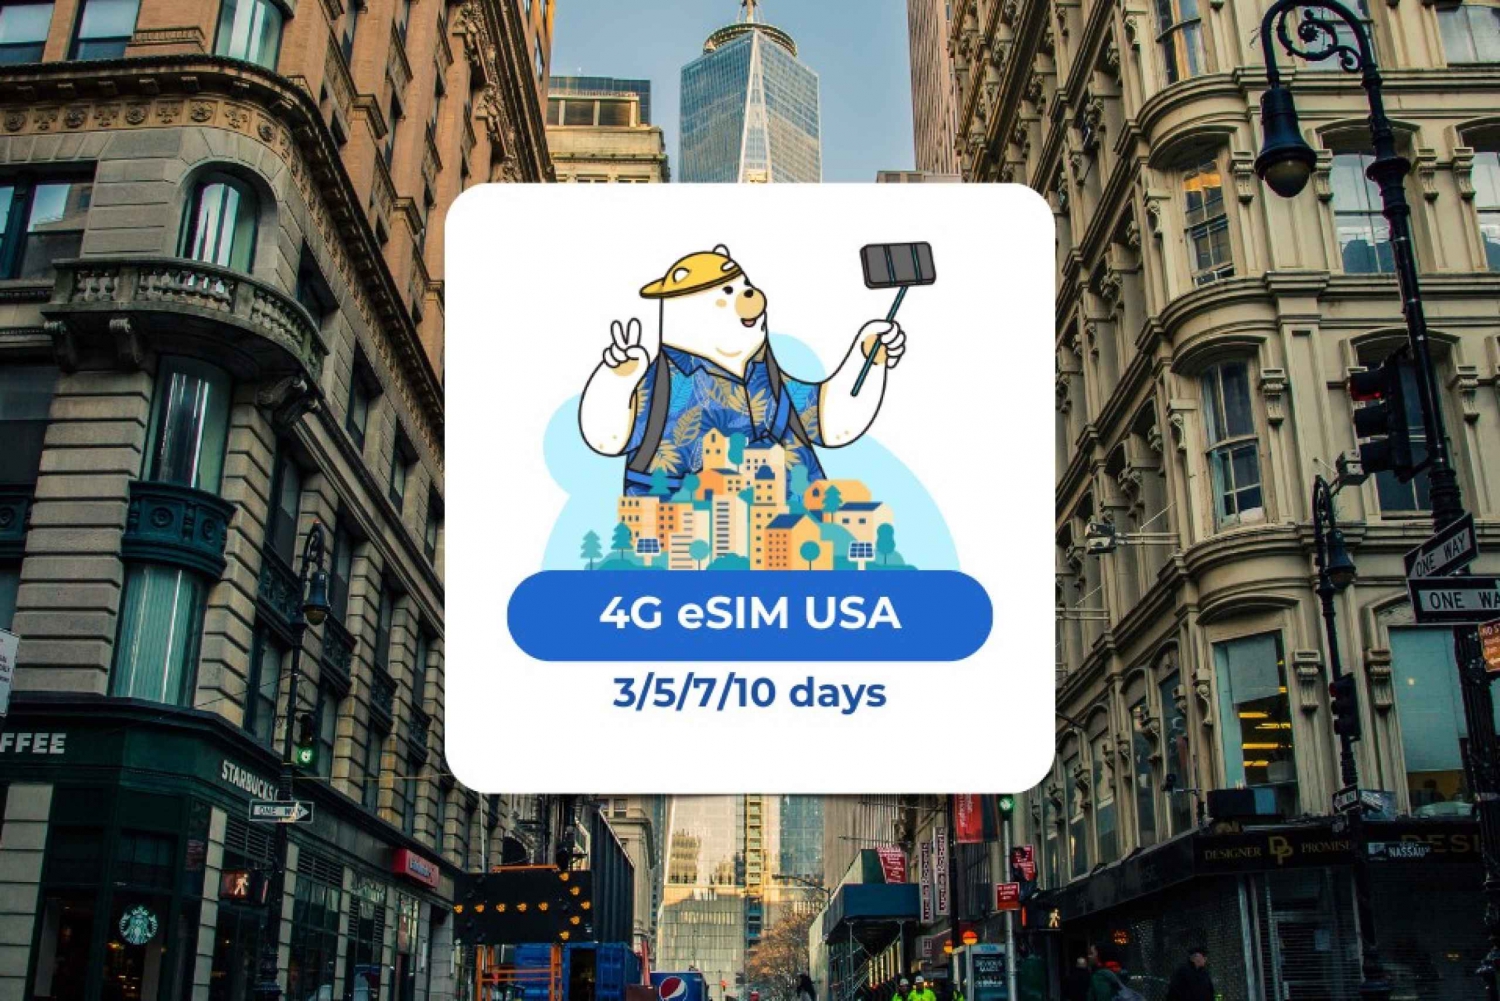 New York: USA Esim Data Packages